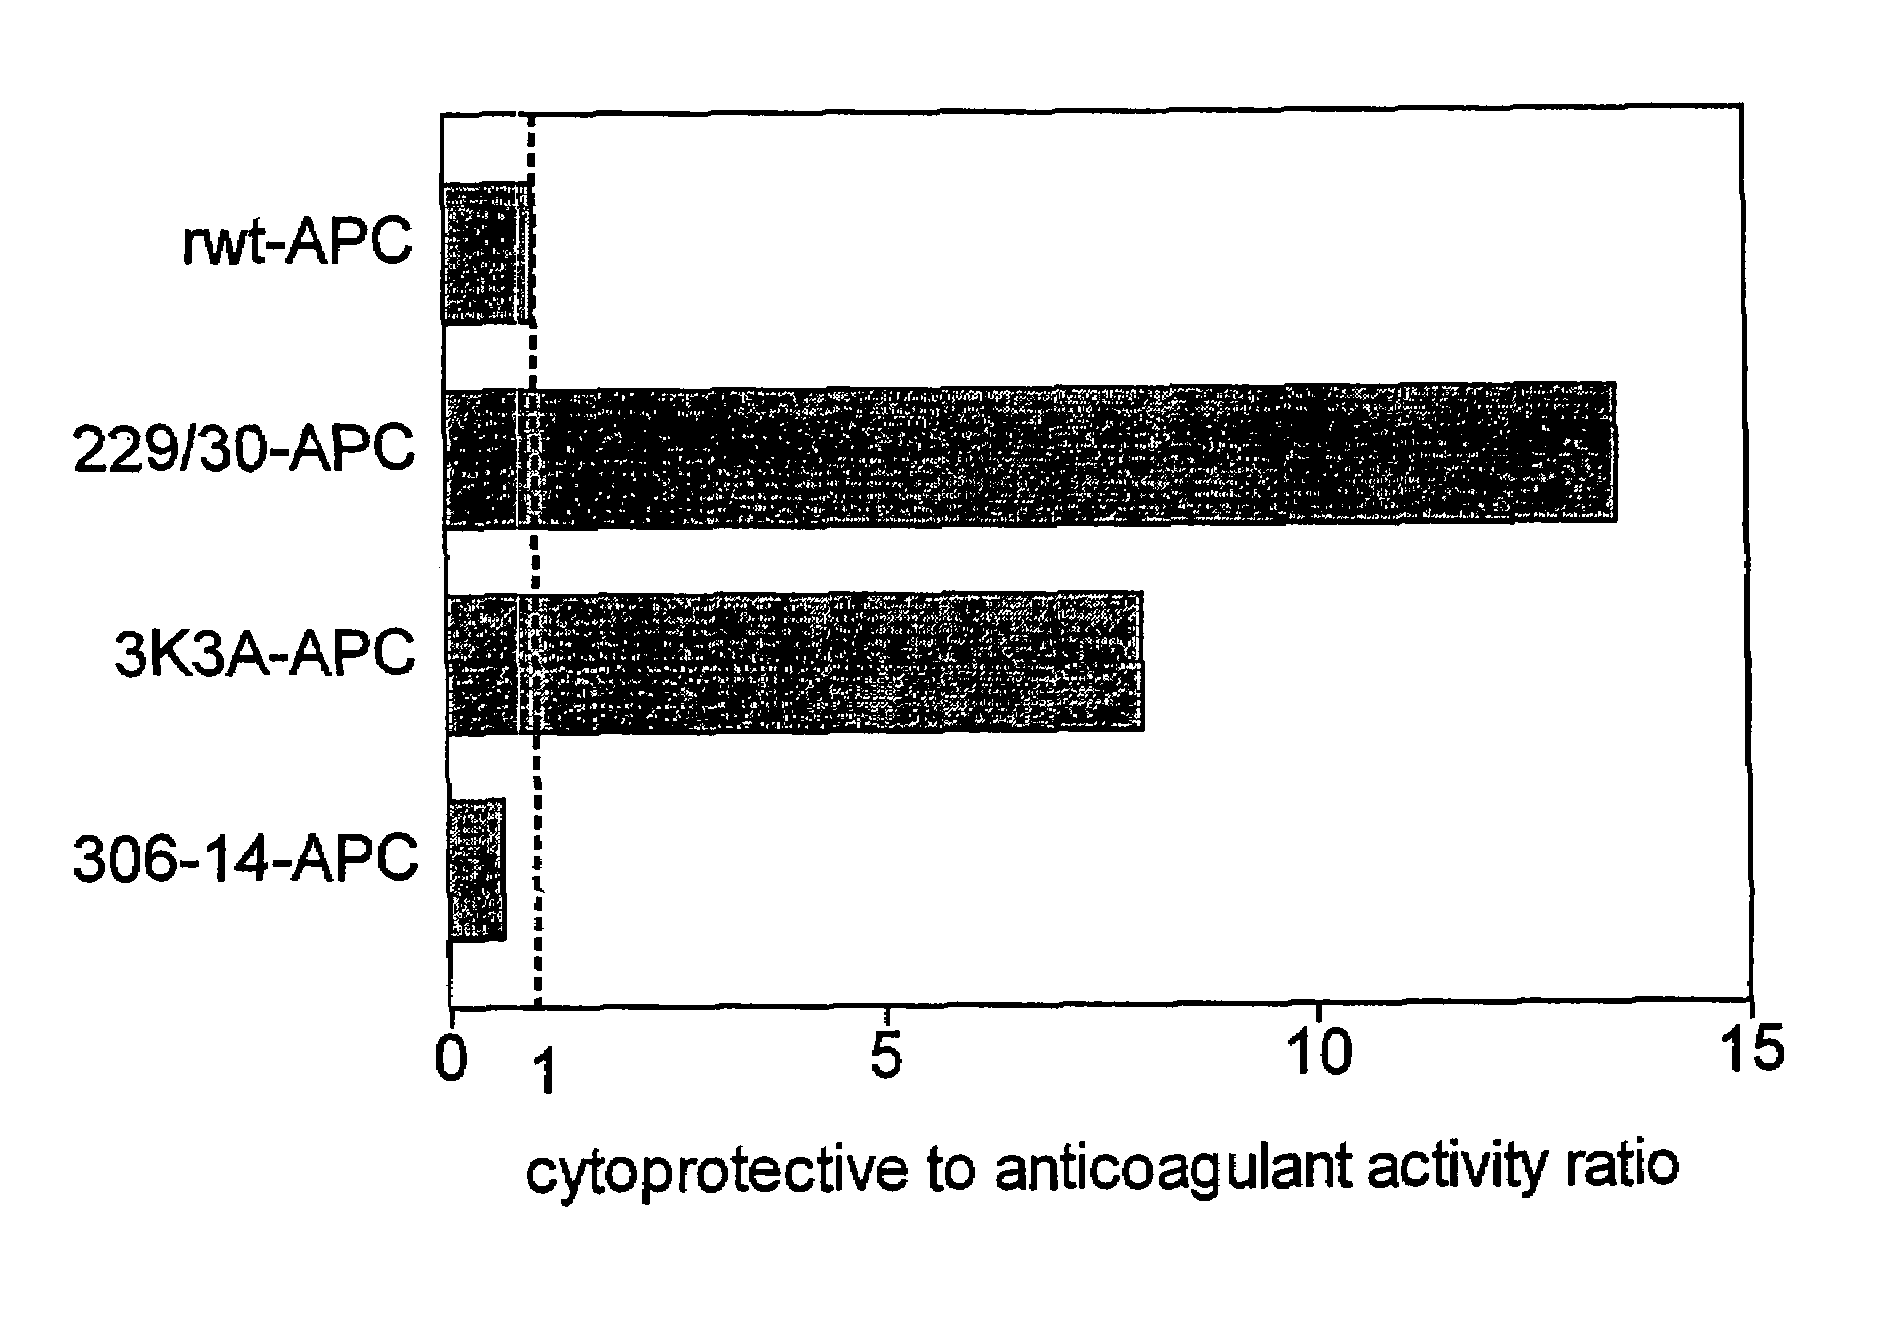 Activated protein C variants with normal cytoprotective activity but reduced anticoagulant activity